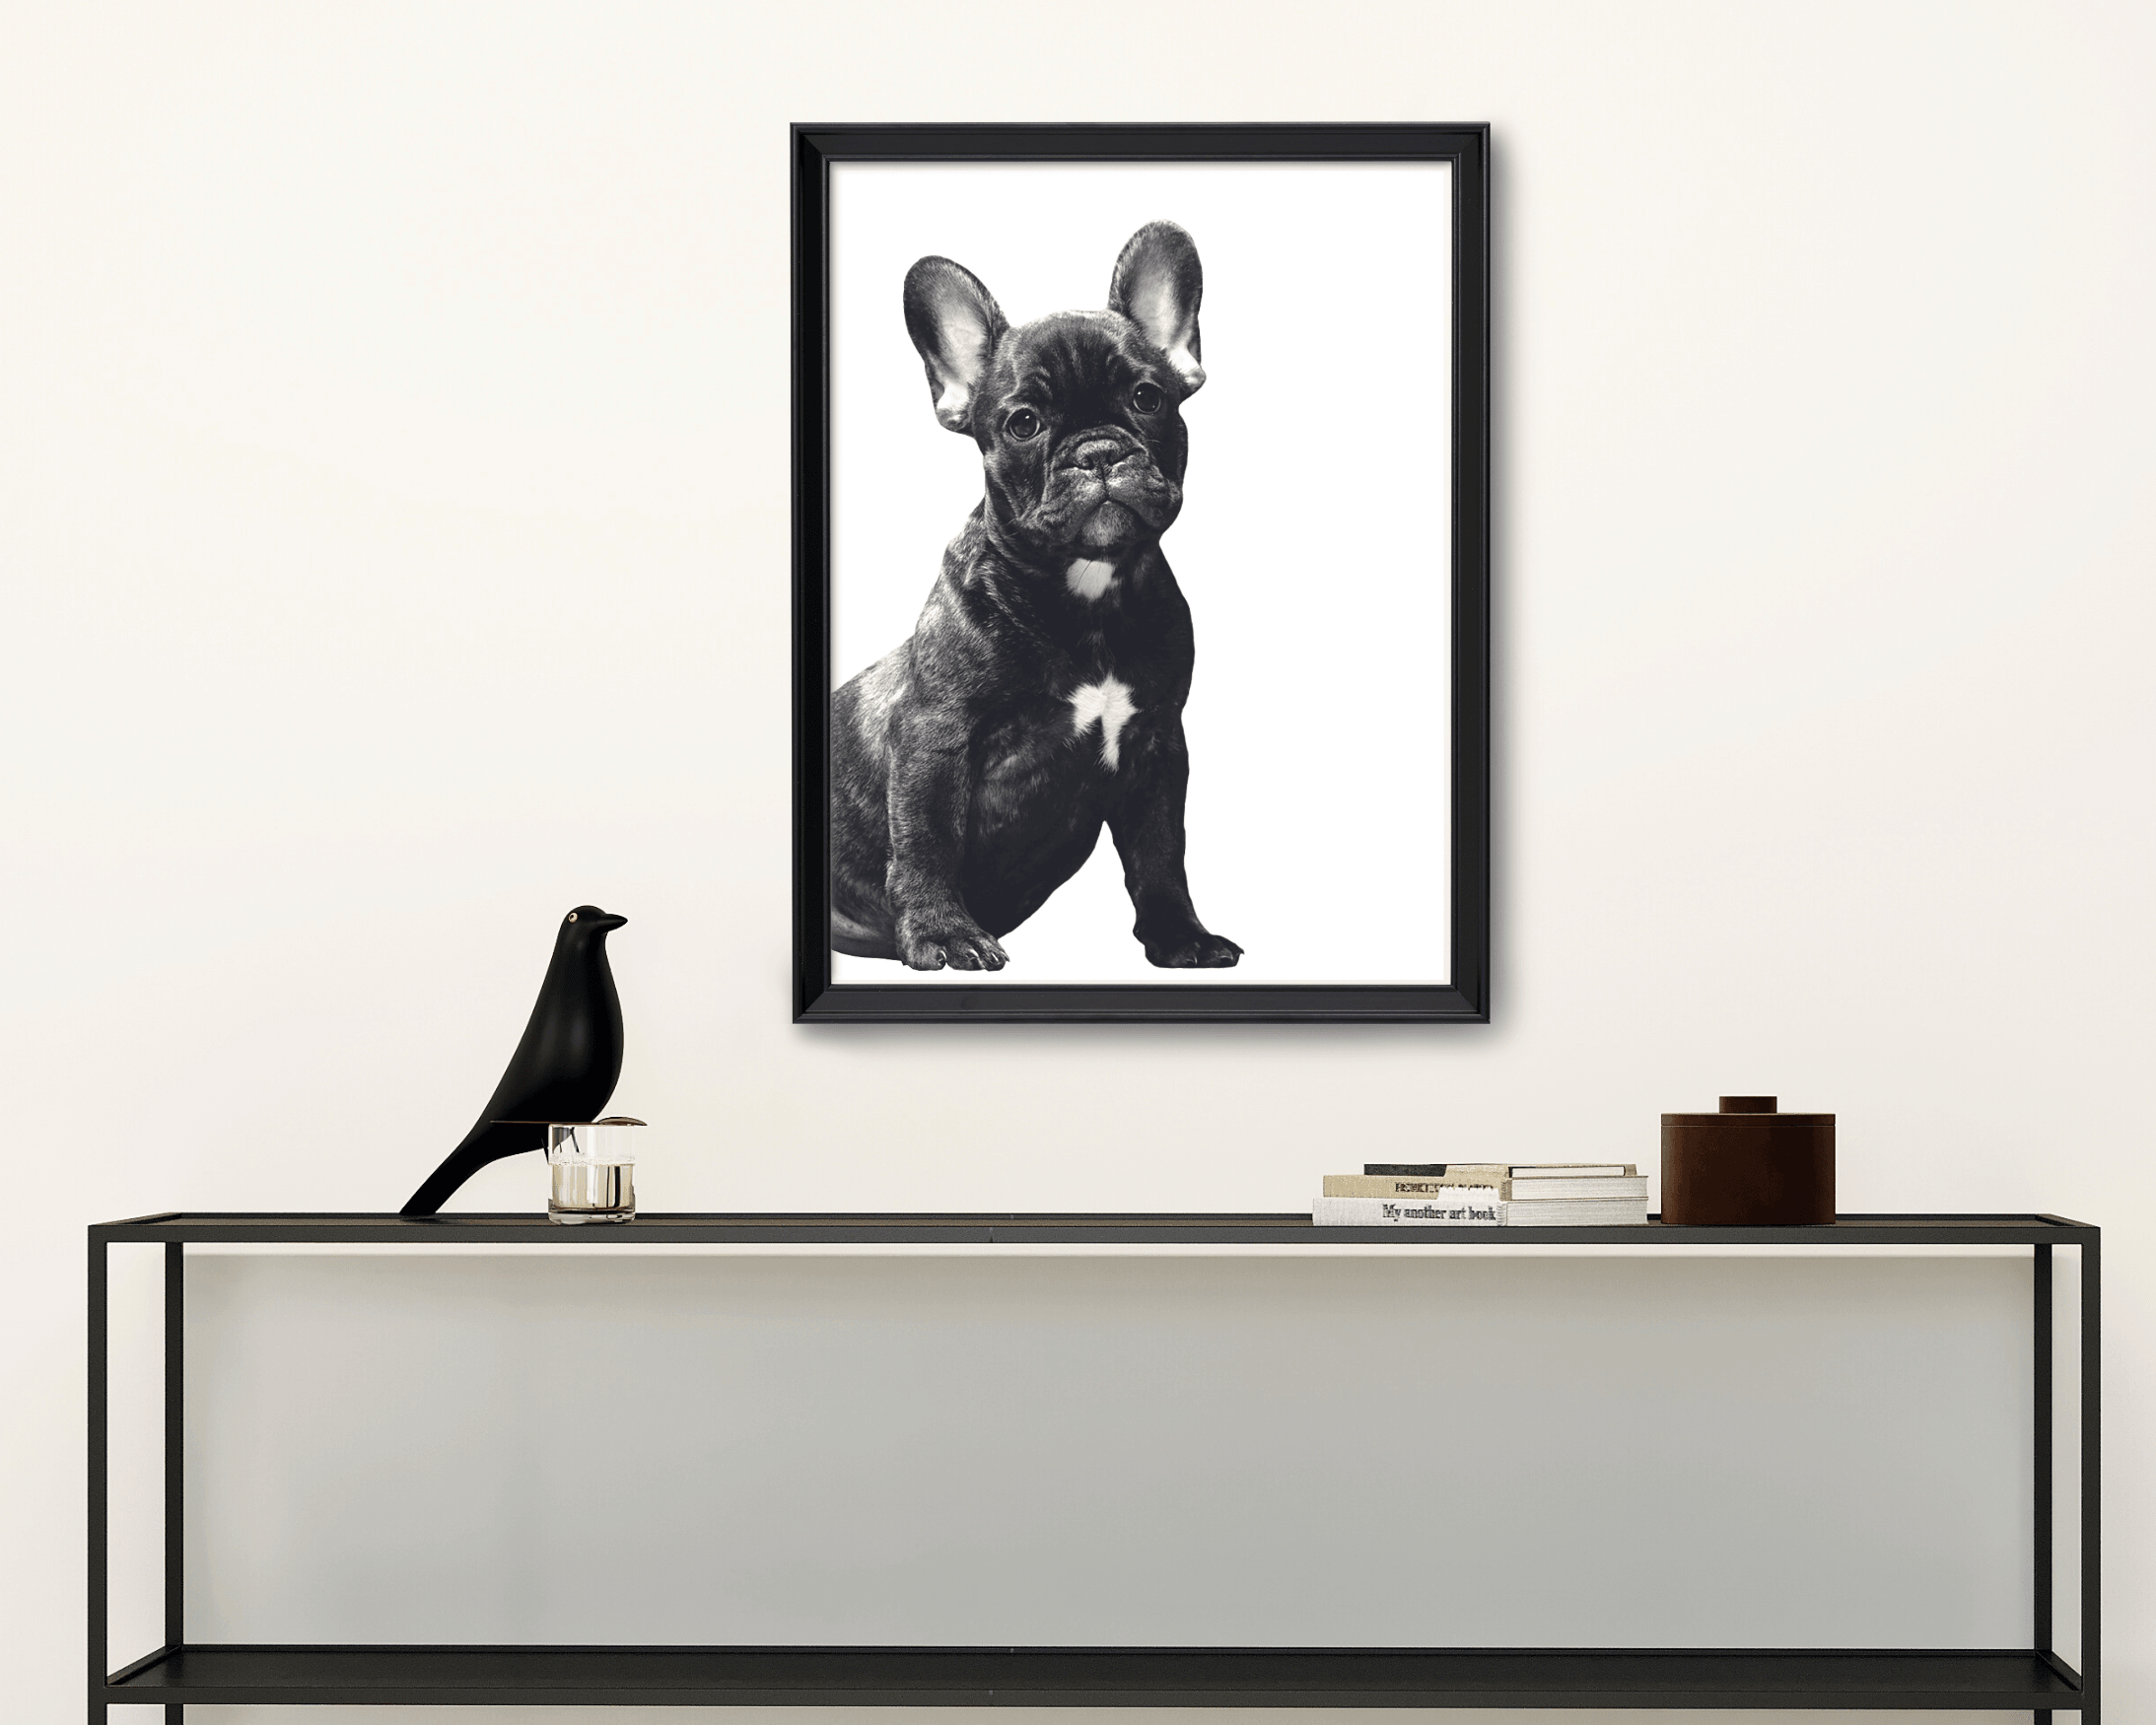 Poster | Tierposter Hund | schwarz weiß | French Bulldogge Frenchie - Roo's Gift Shop